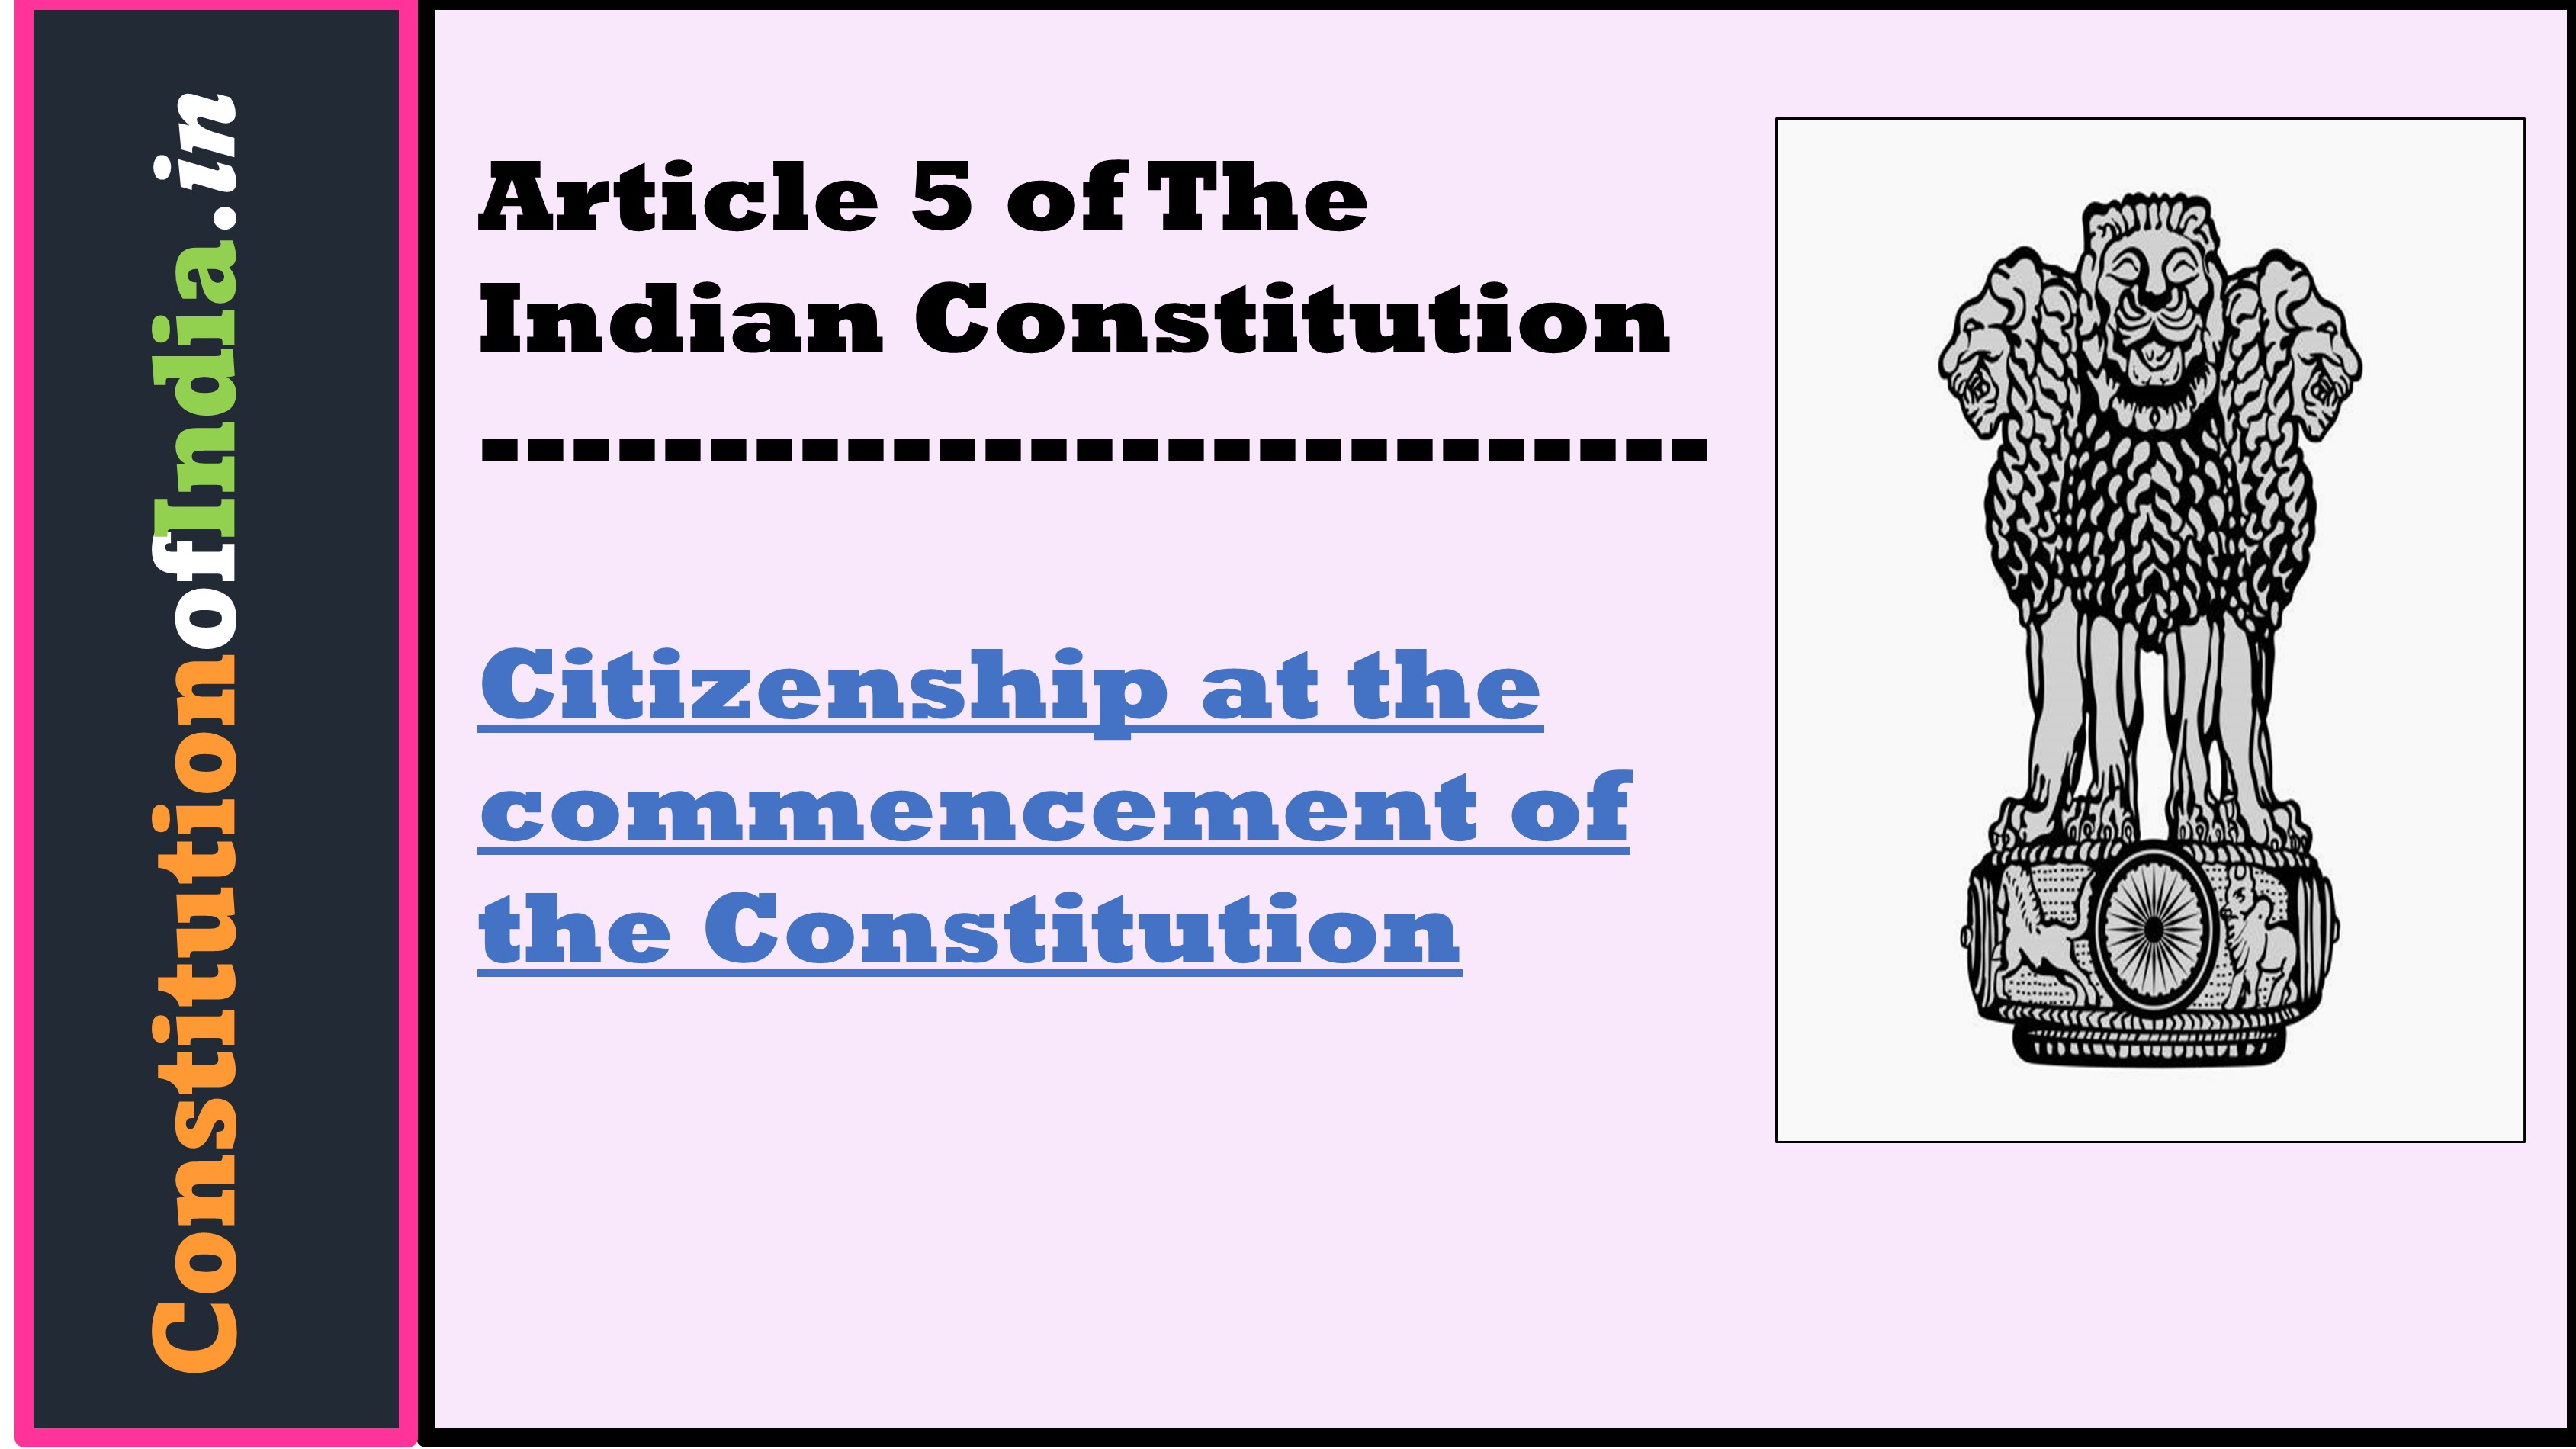 Article 5 of the Indian Constitution